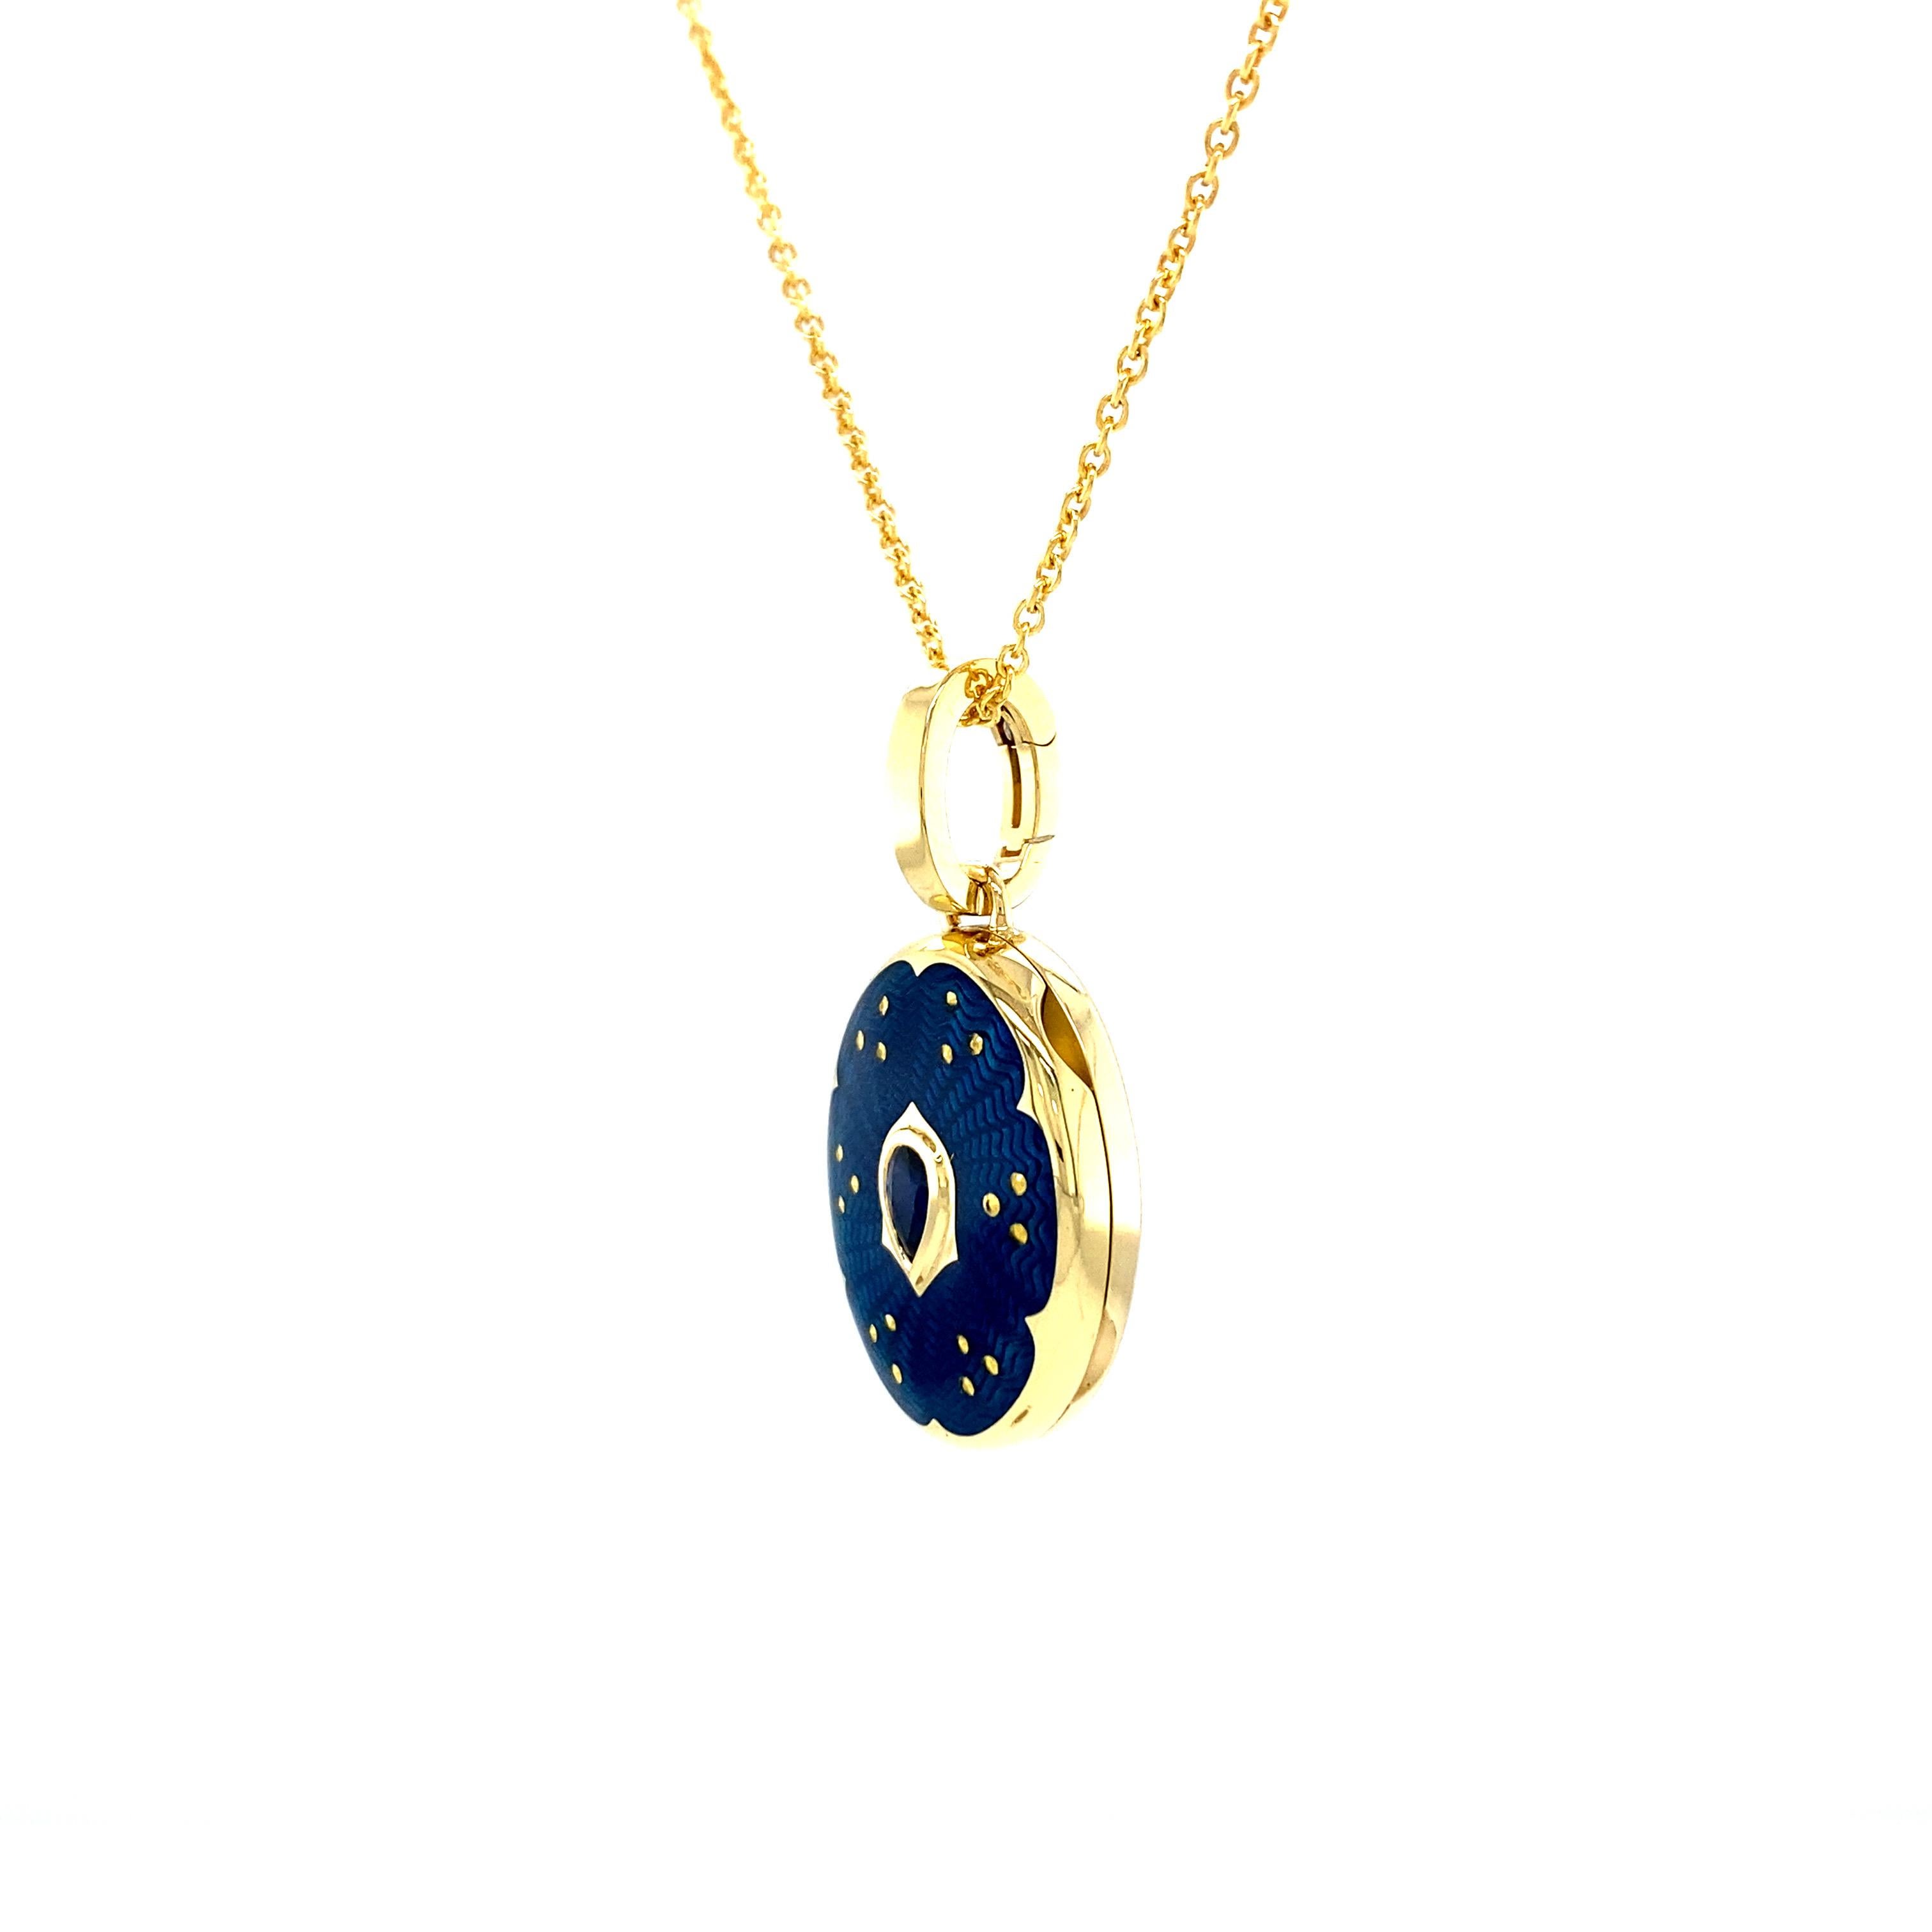 Women's  Oval Locket Pendant - 18k Yellow Gold - Blue Enamel with Paillons - 1 Sapphire For Sale